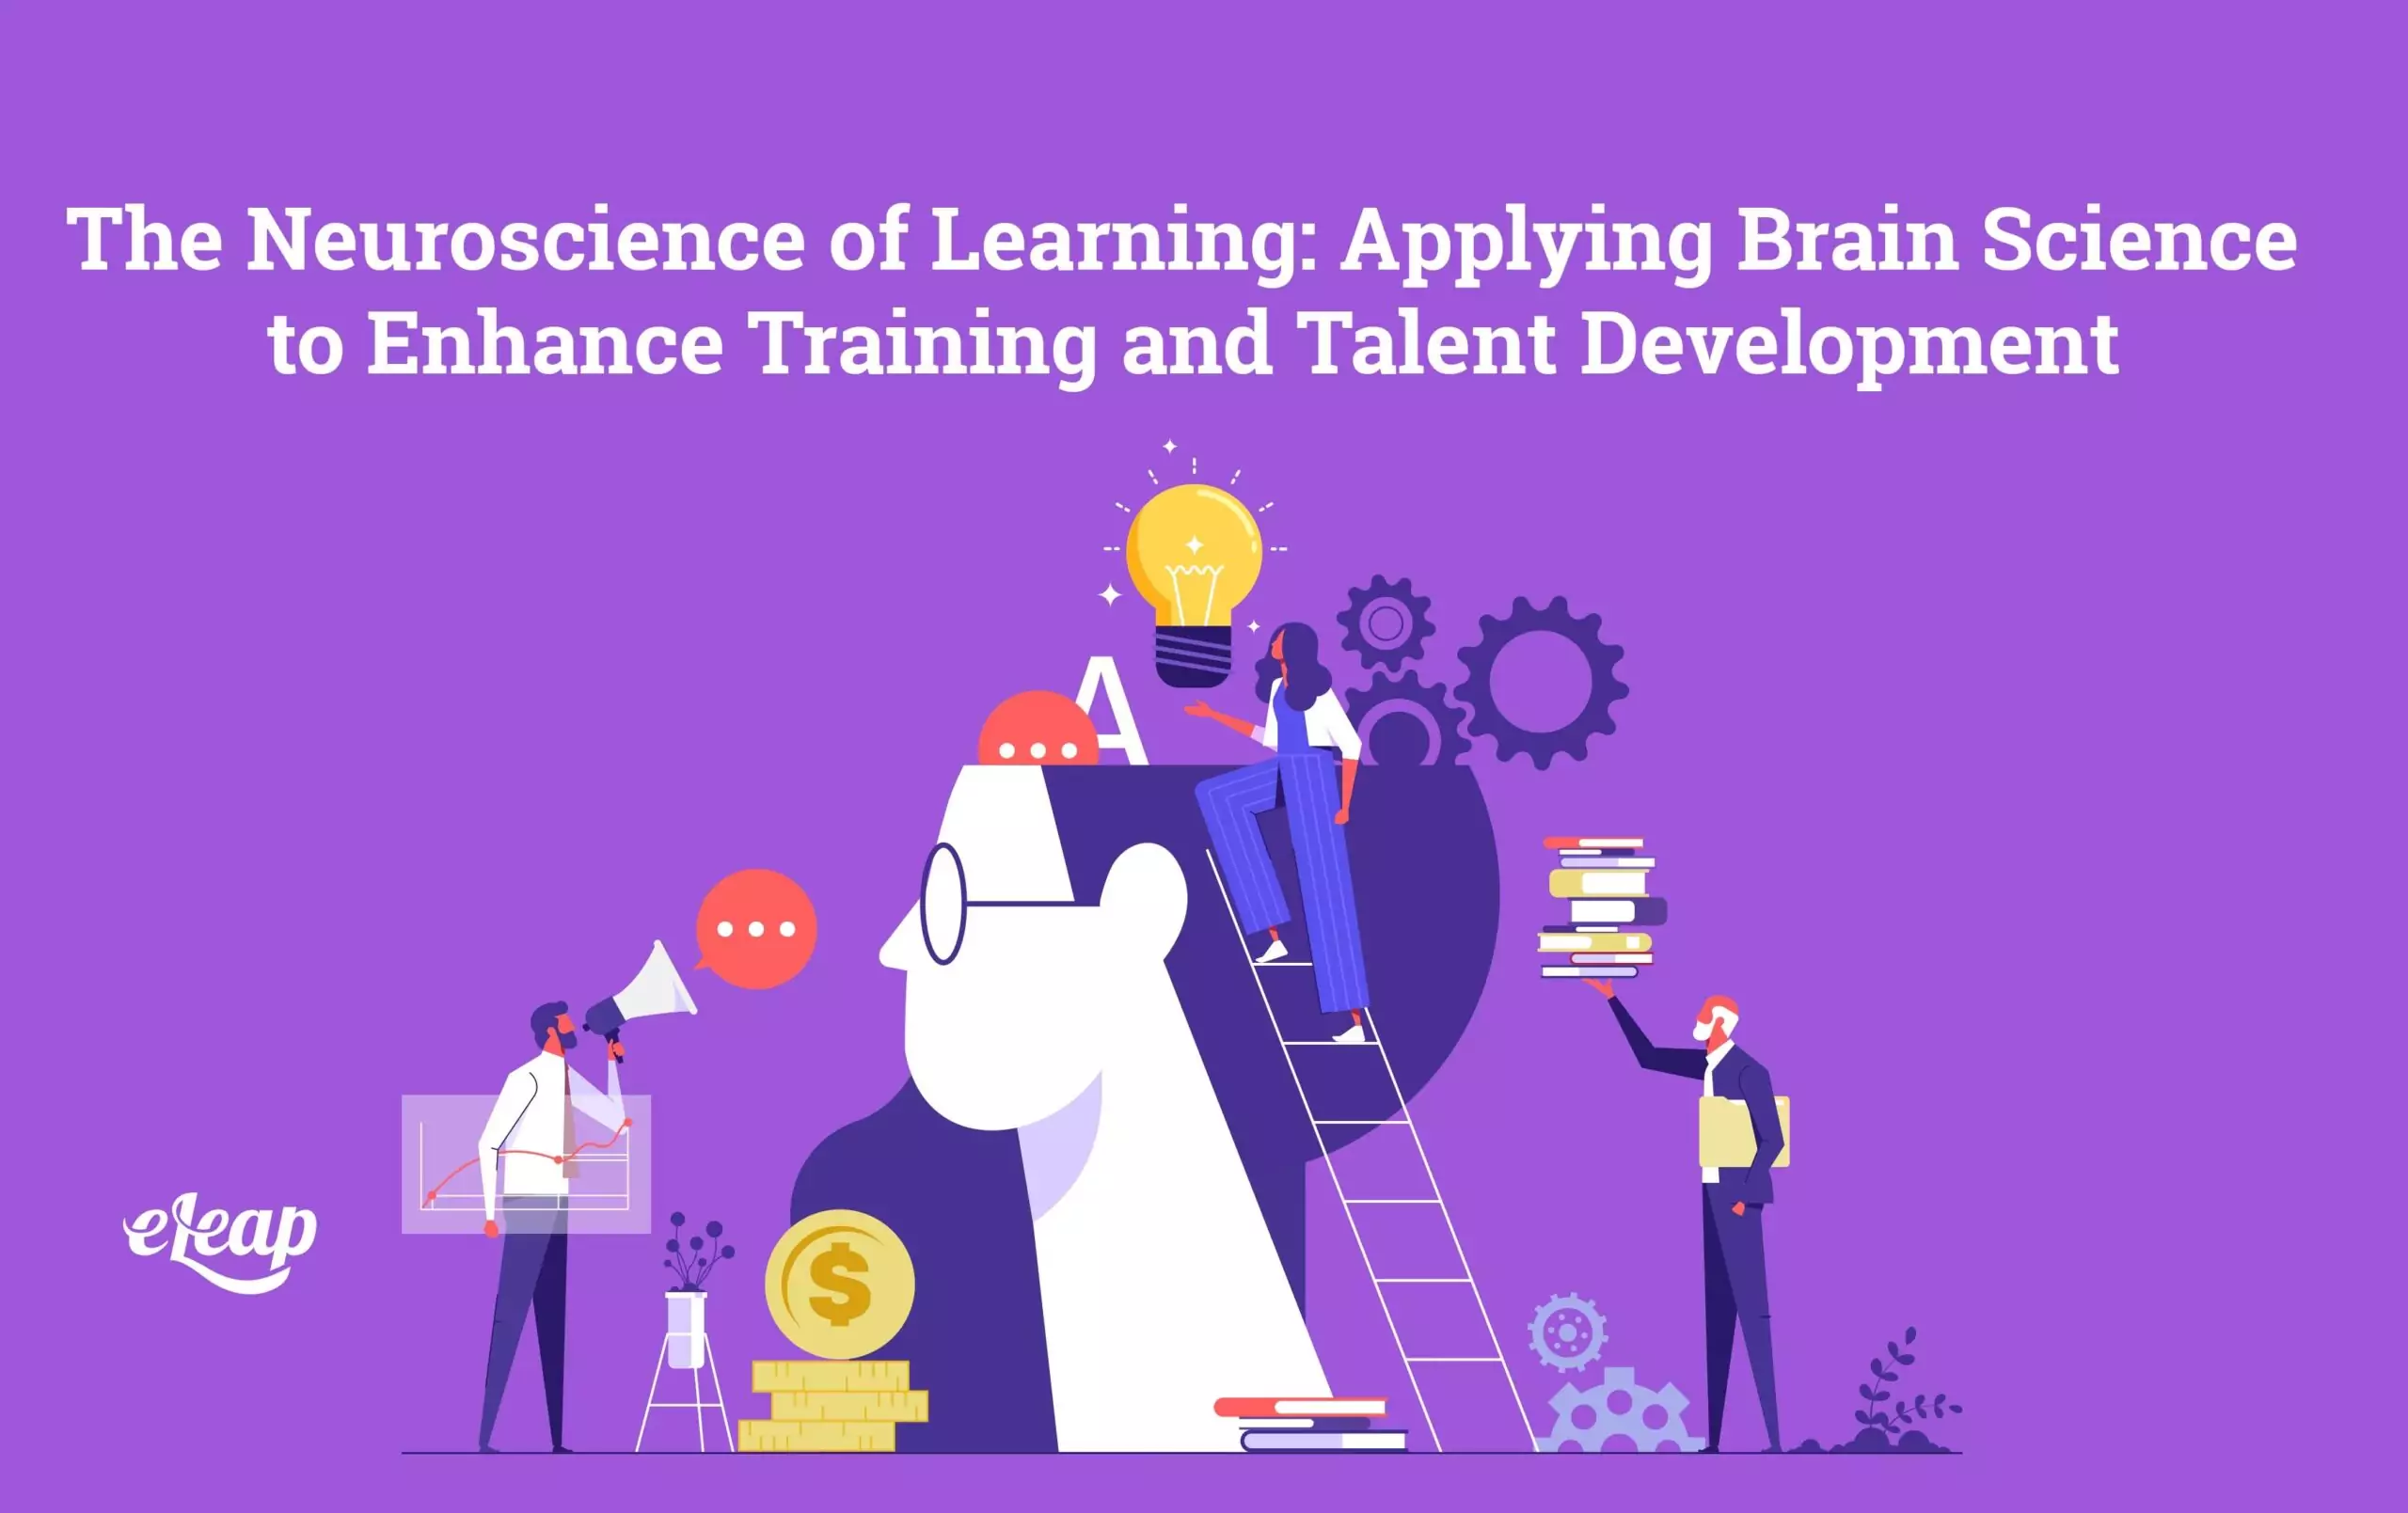 The Neuroscience of Learning: Applying Brain Science to Enhance Training and Talent Development